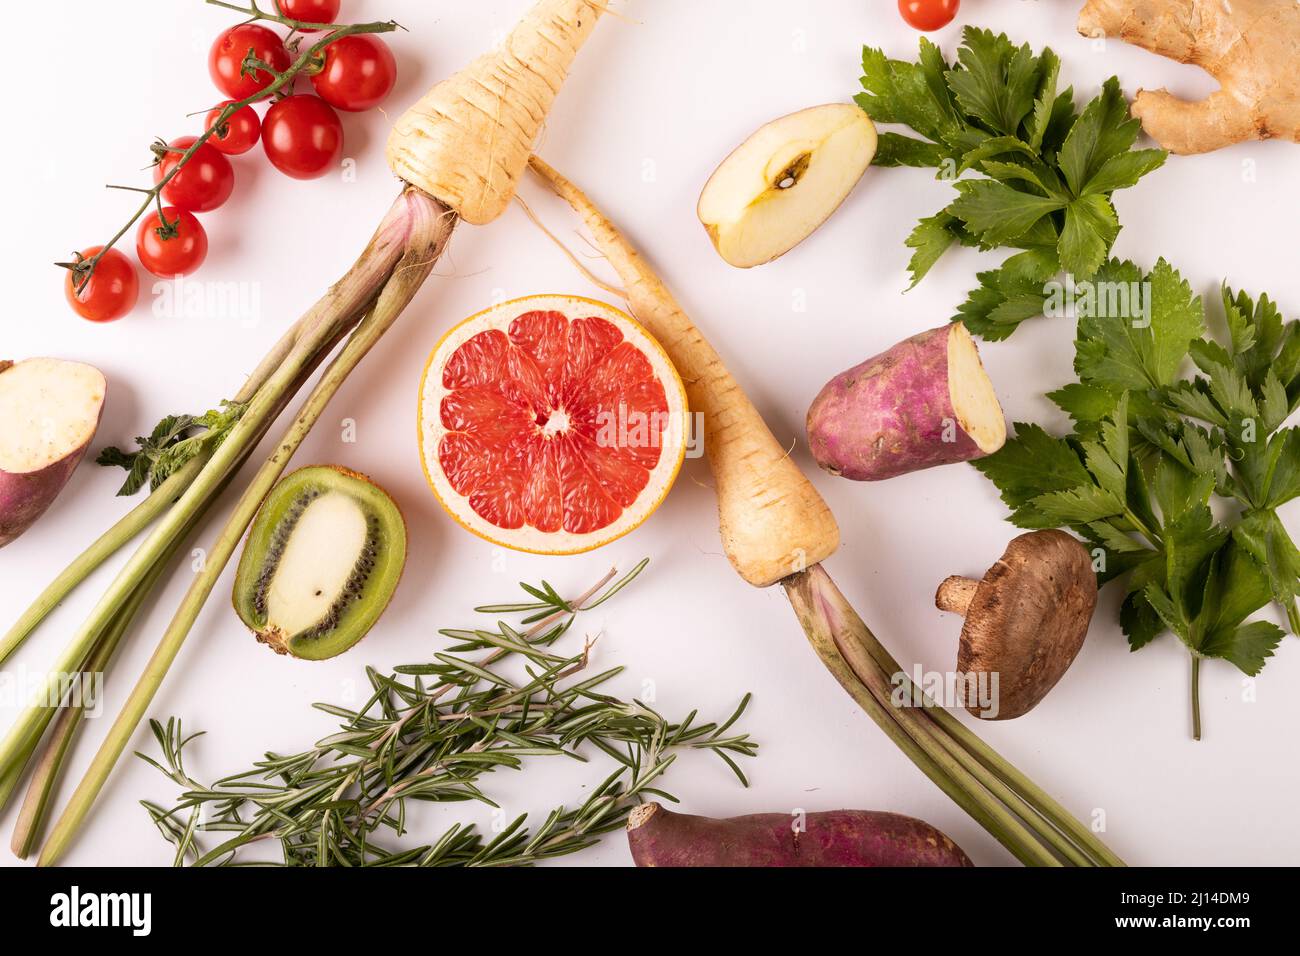 Overhead view of fresh vegetables and fruits on white background Stock Photo